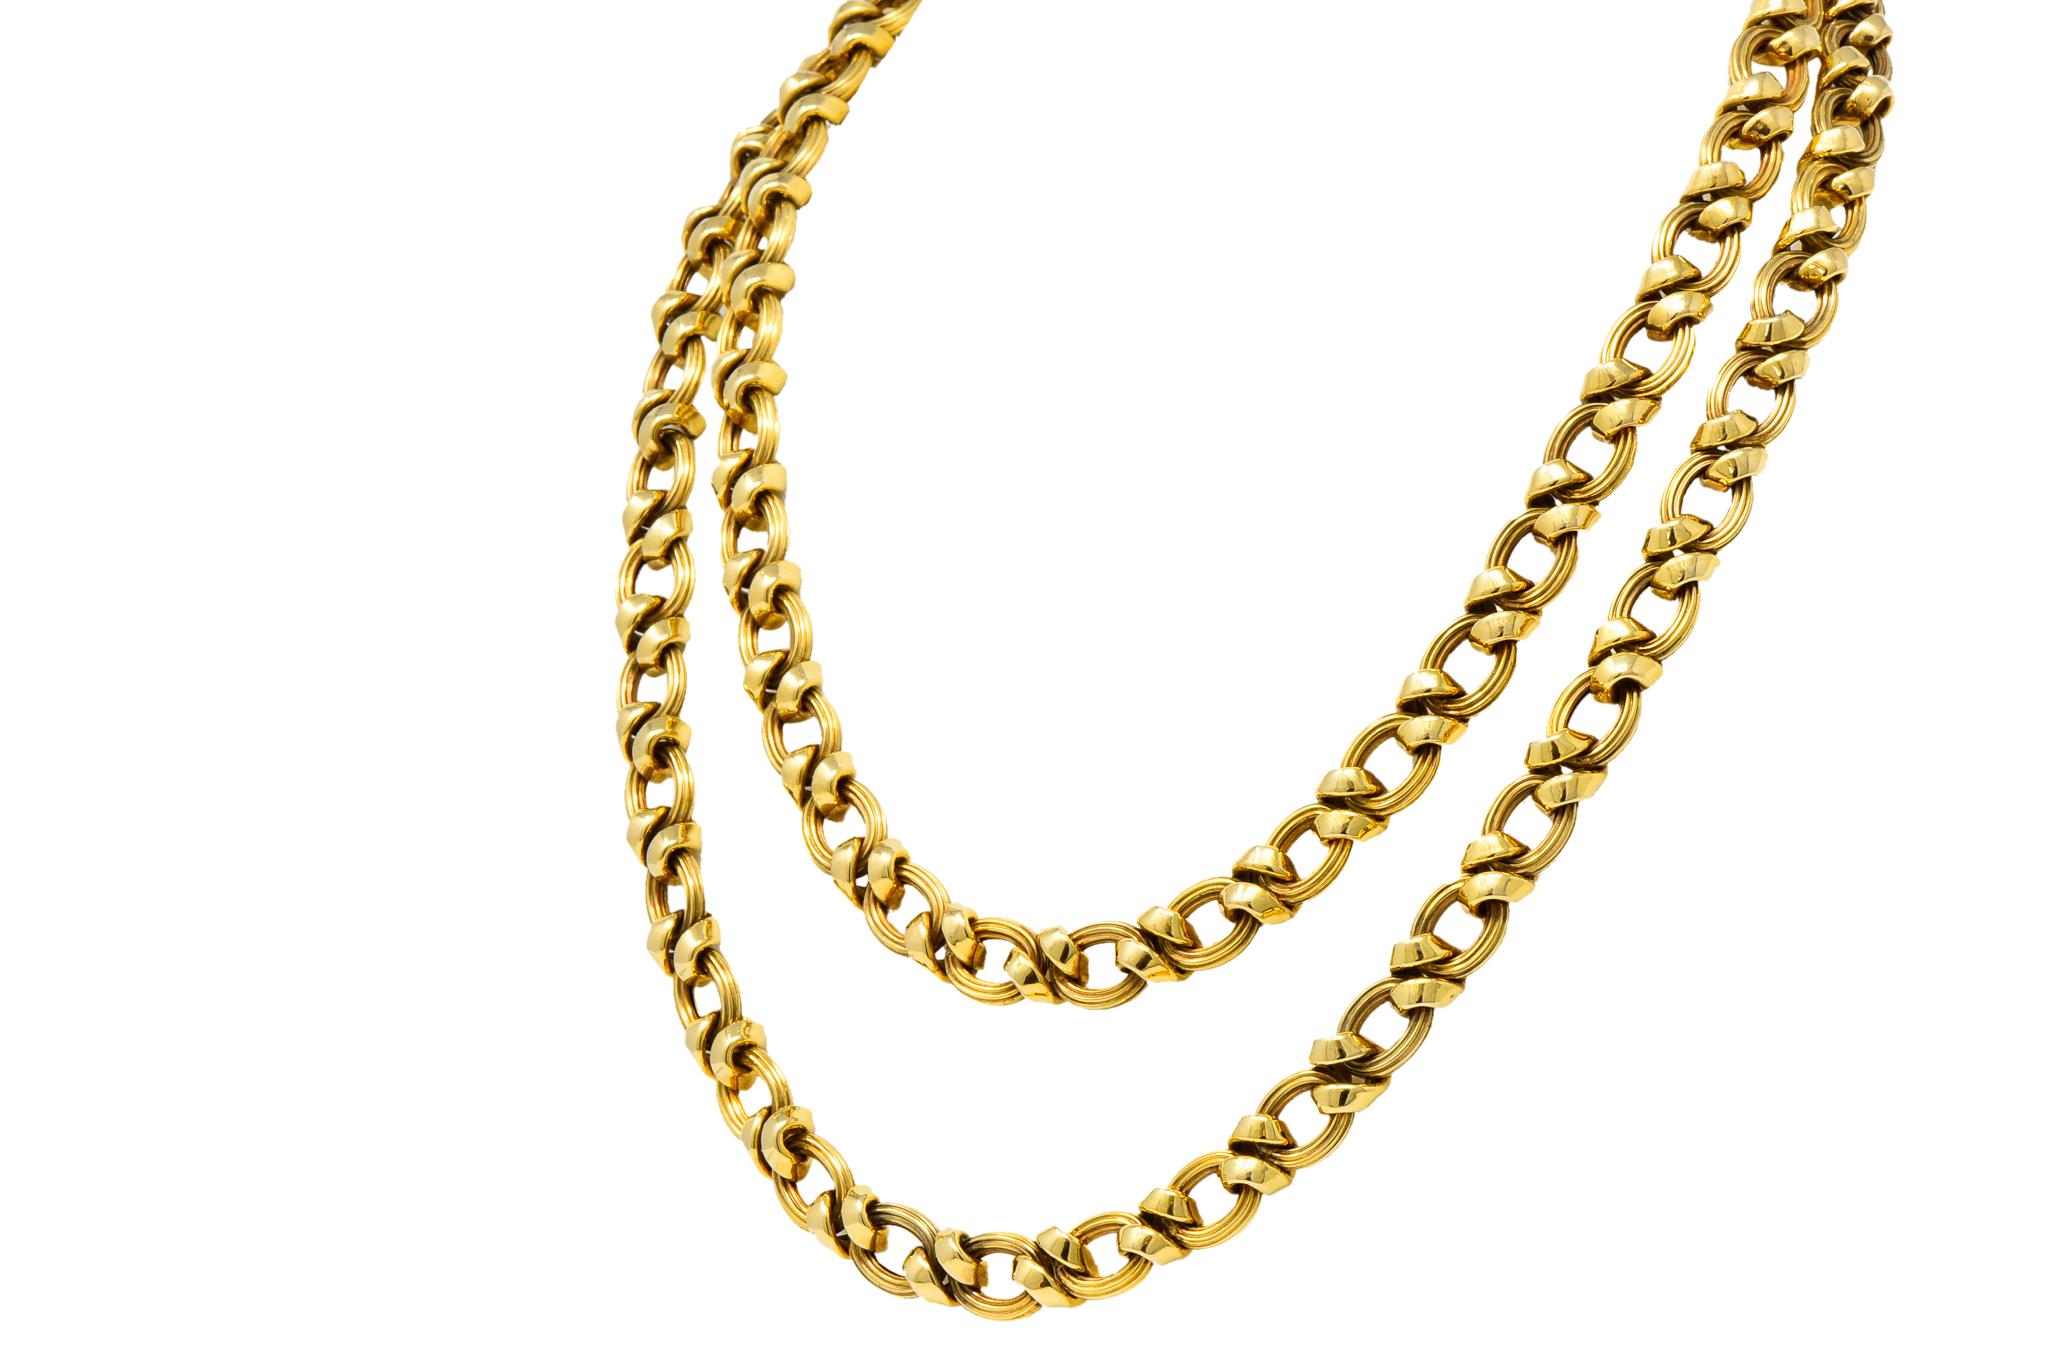 Long chain necklace comprised of both ribbed links and twisted polished gold spacer links

Completed by concealed clasp with double figure eight safeties

With initials JMP inscribed on back of clasp

Stamped Italy and 14KT for 14 karat